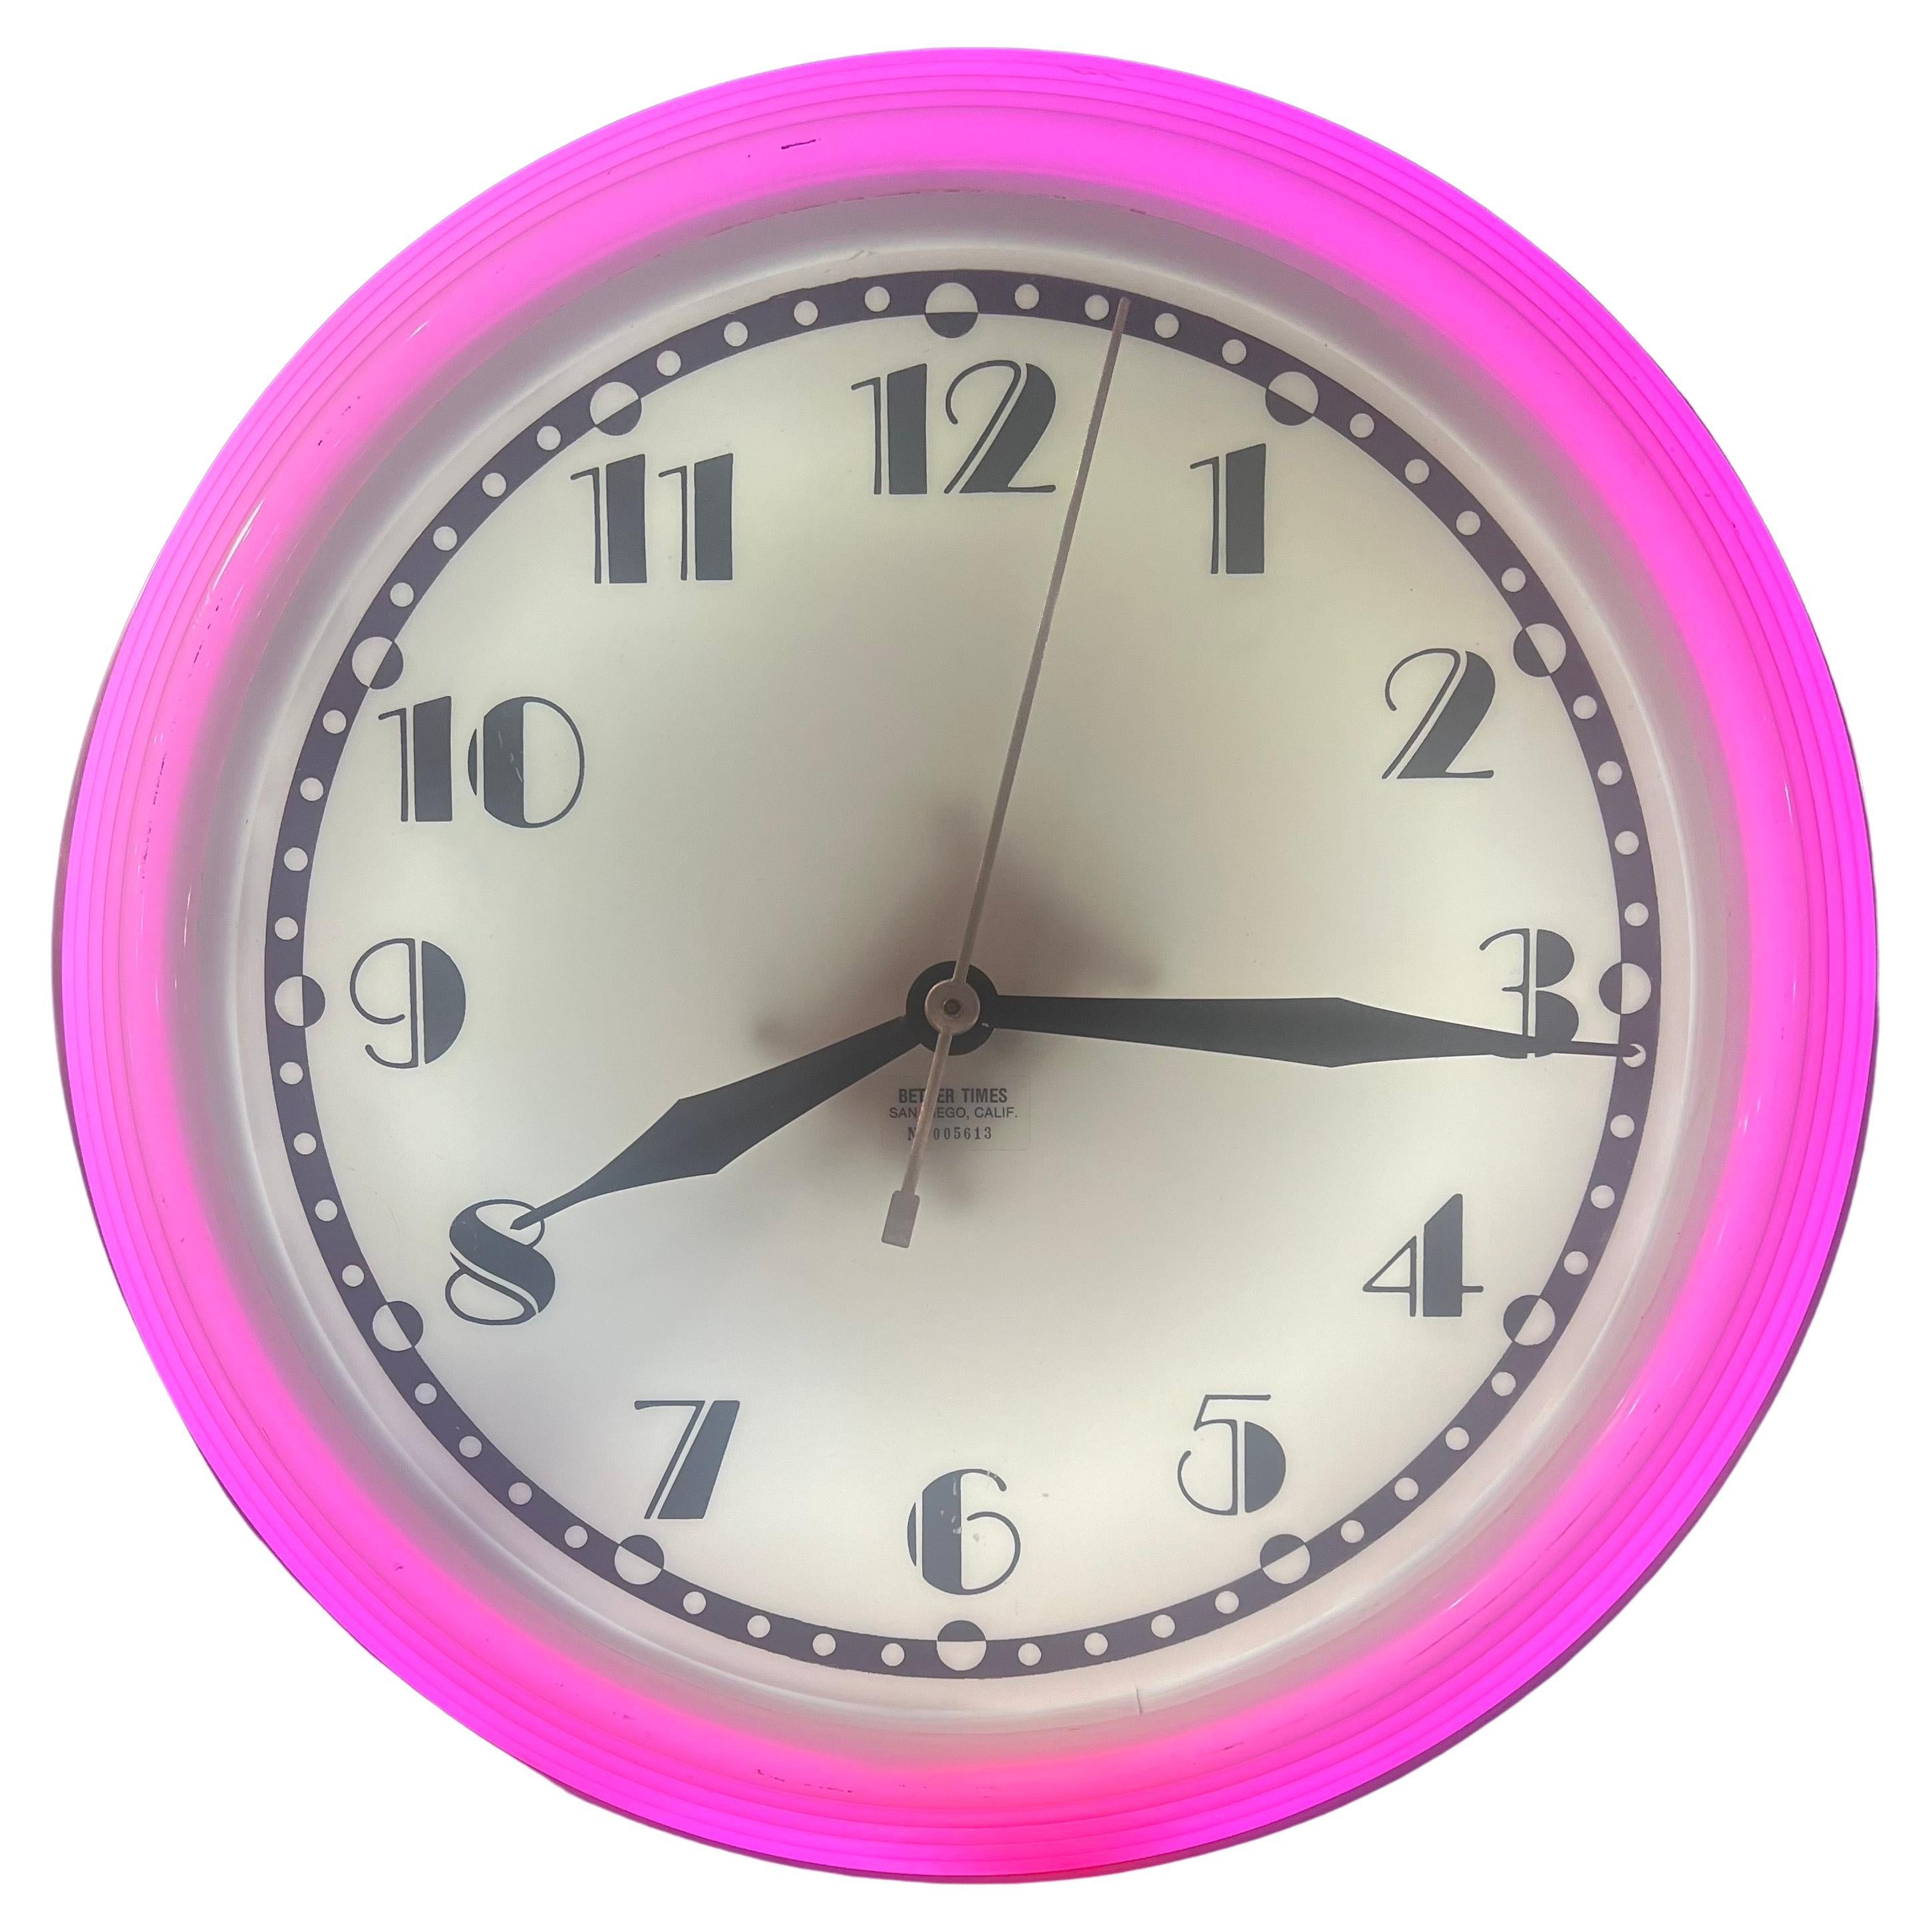 Better Times Neon Art Deco Diner Bubble Electric Wall Clock  For Sale